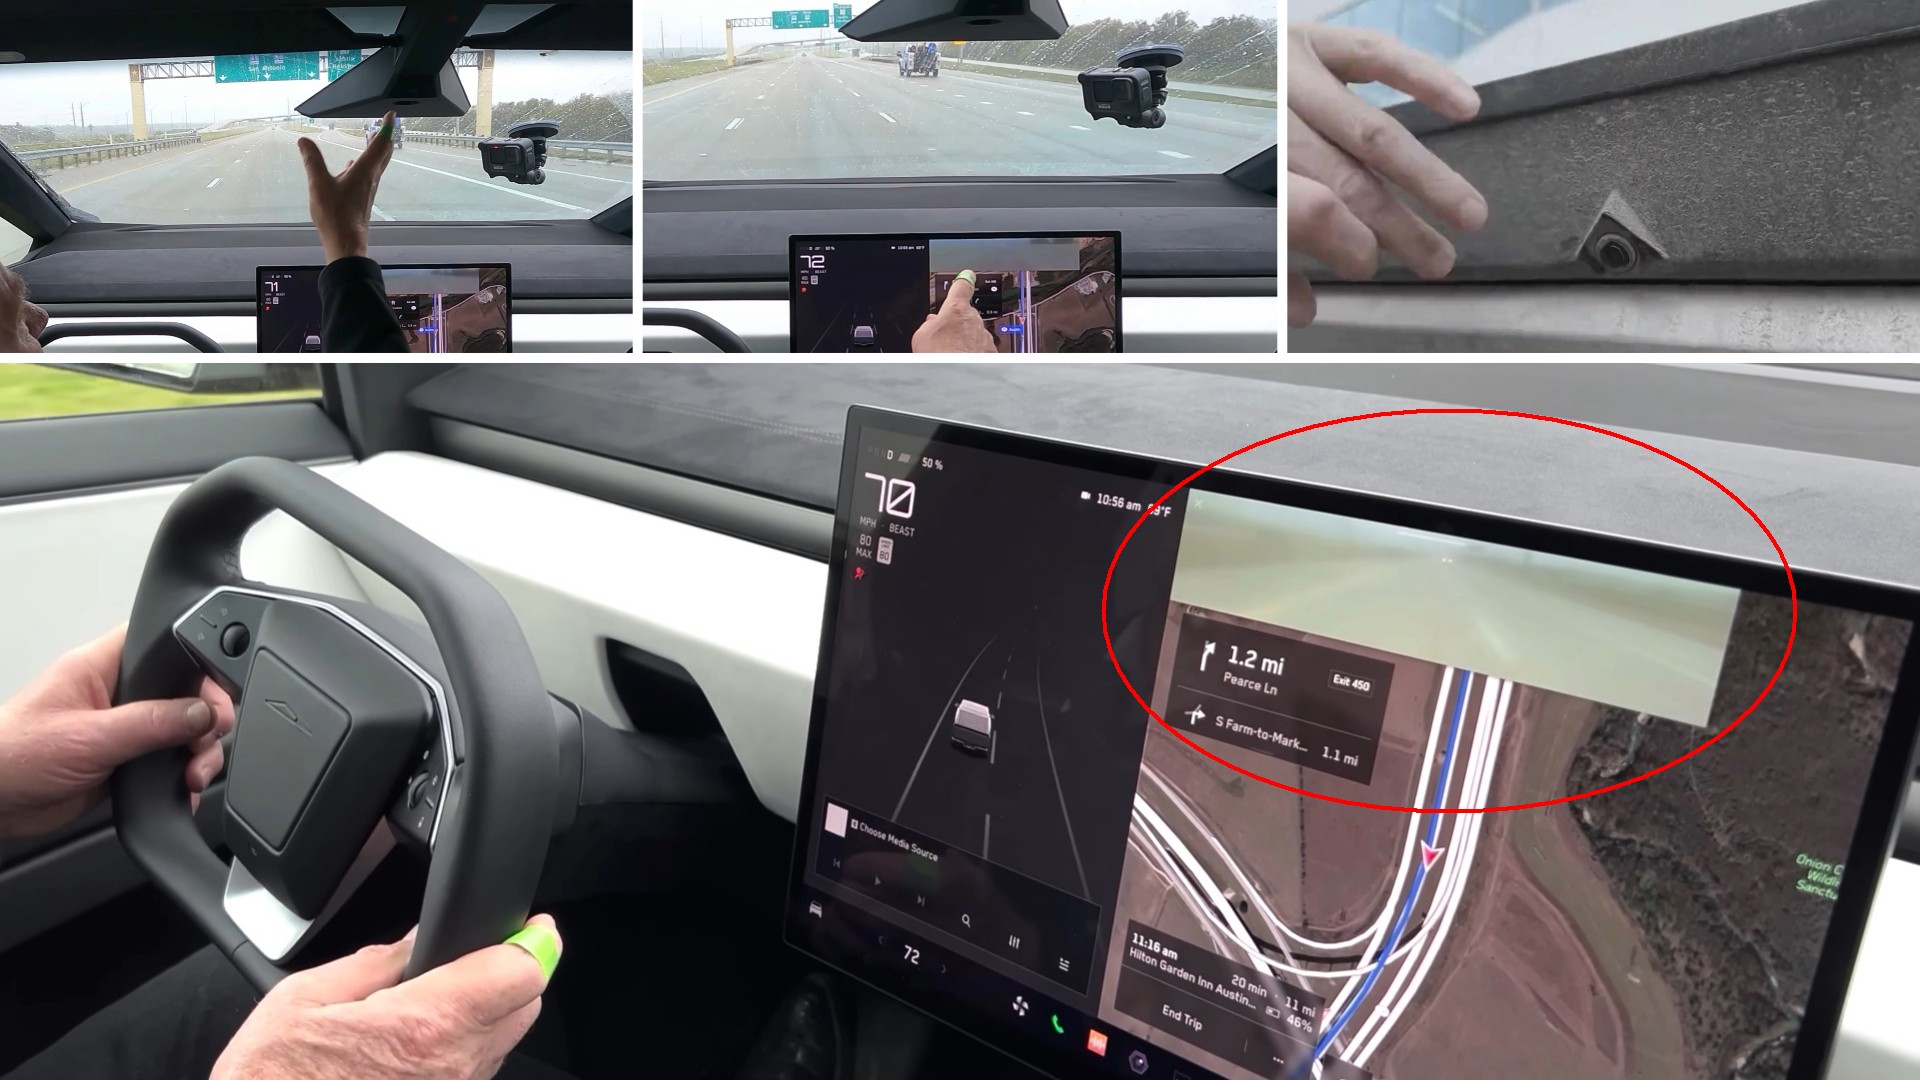 The Cybertruck Has a Rearview Mirror Problem, and Tesla Needs To Address It  - autoevolution